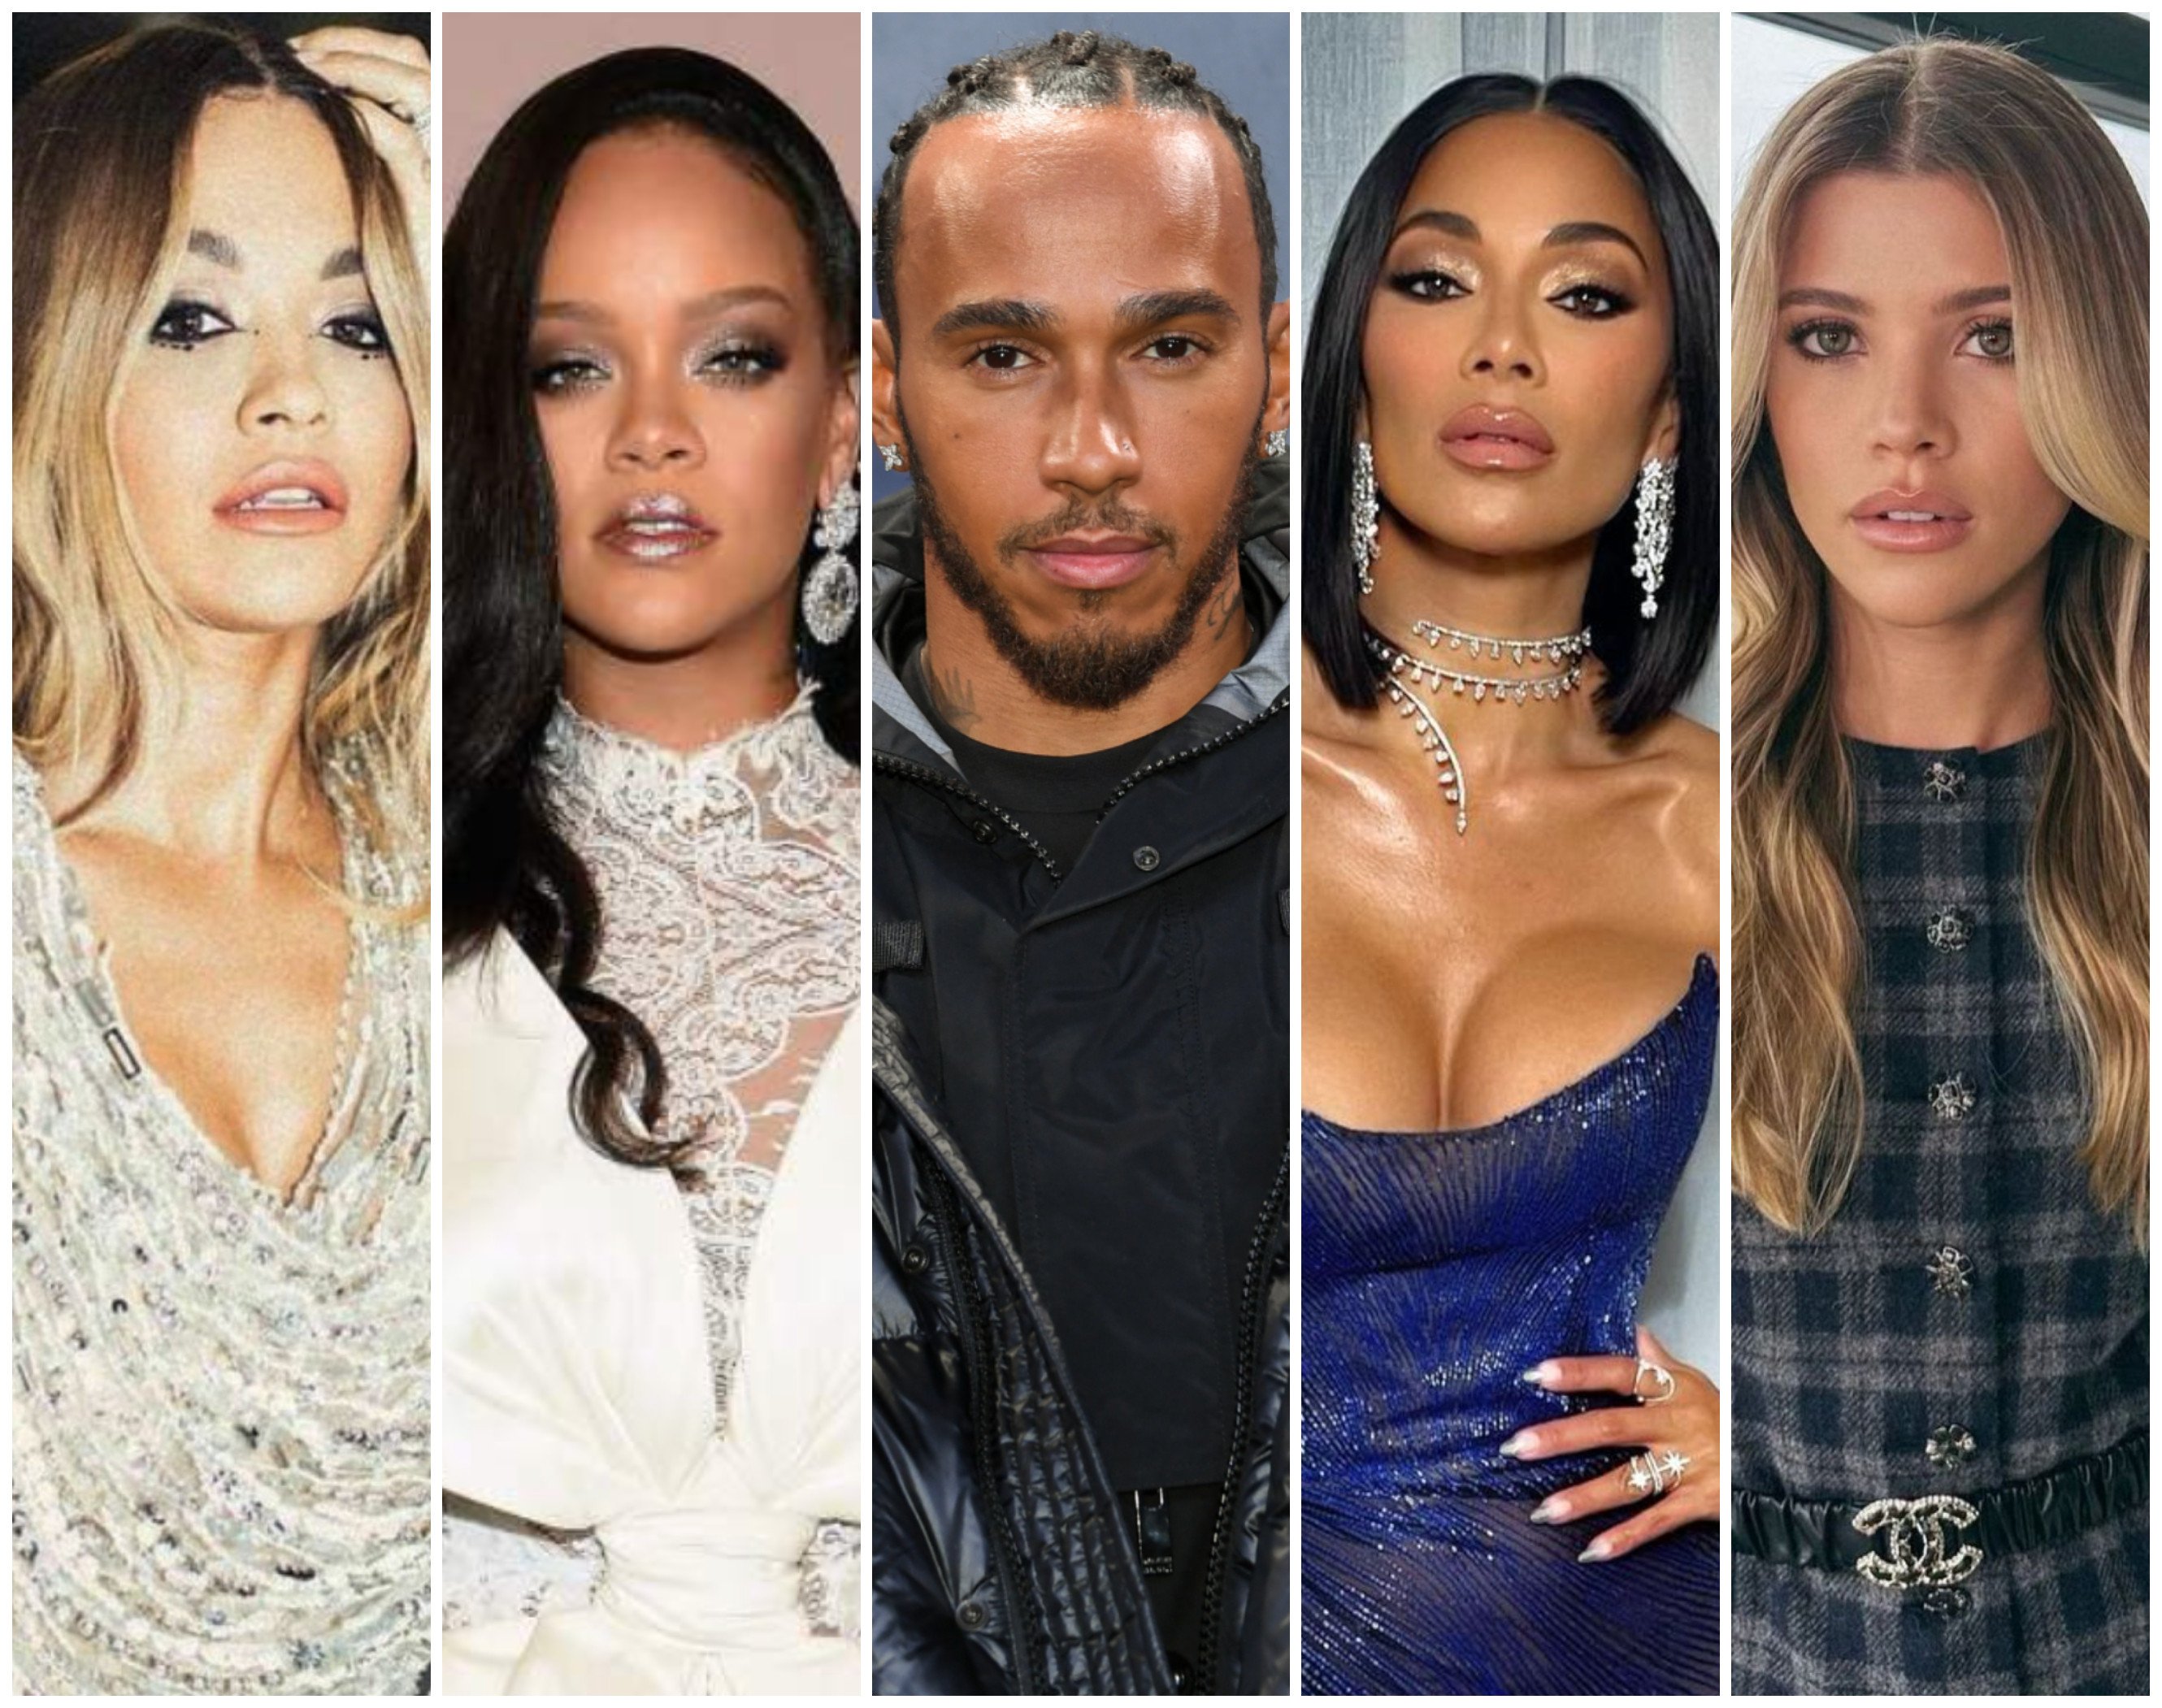 Lewis Hamilton has been linked to everyone from Rita Ora and Rihanna to Nicole Scherzinger and Sofia Richie over the years. Photos: Handout; AFP; Getty Images; @nicolescherzinger, @sofiarichie/Instagram